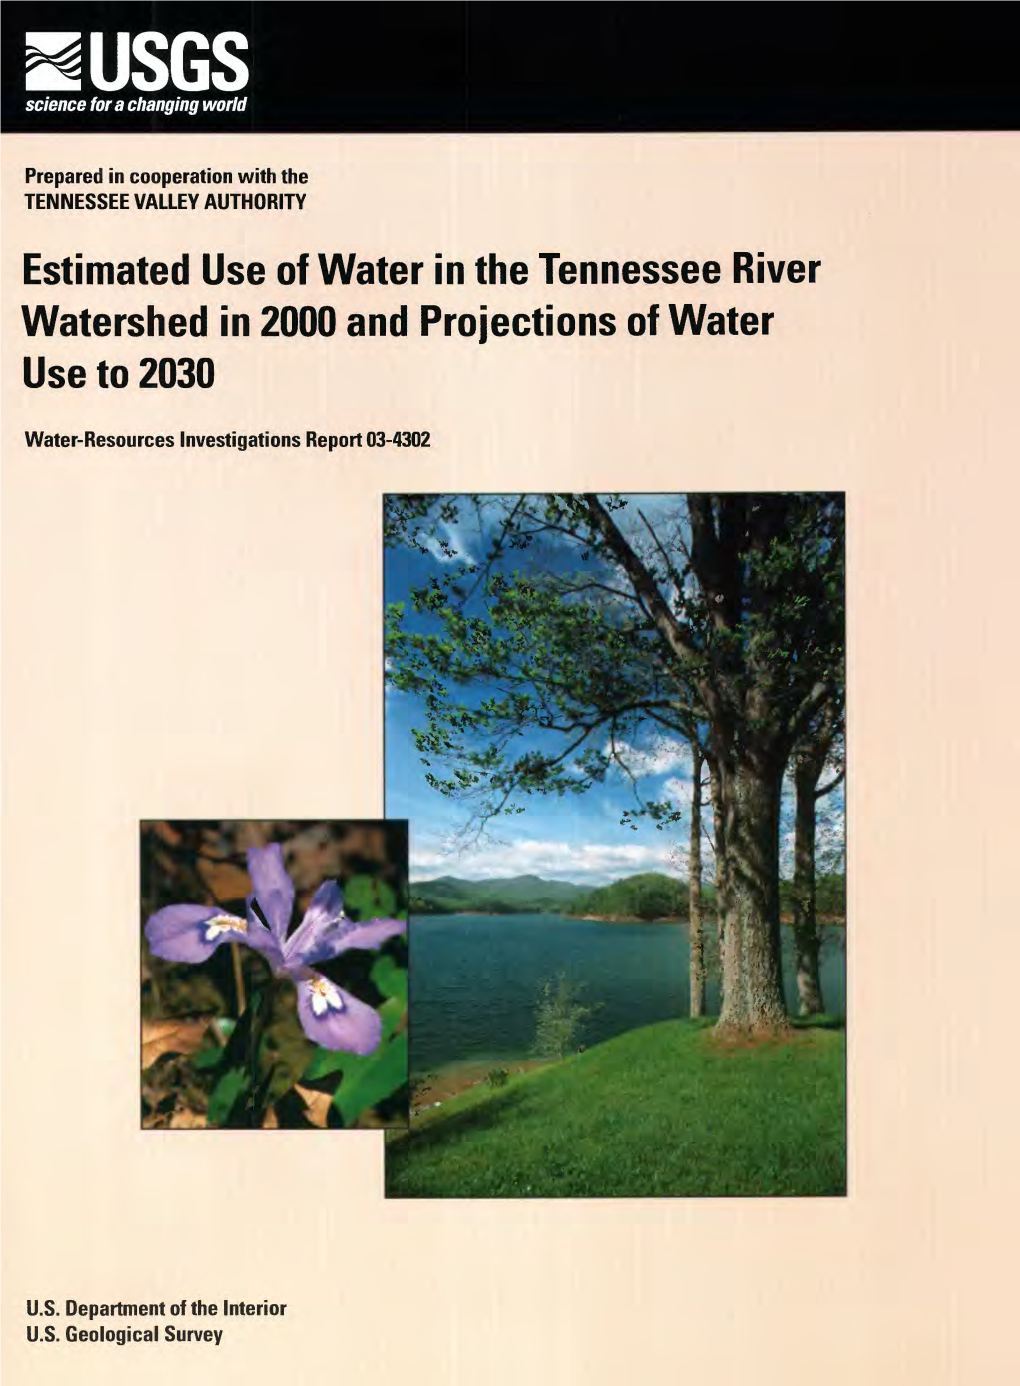 Estimated Use of Water in the Tennessee River Watershed in 2000 and Projections of Water Use to 2030